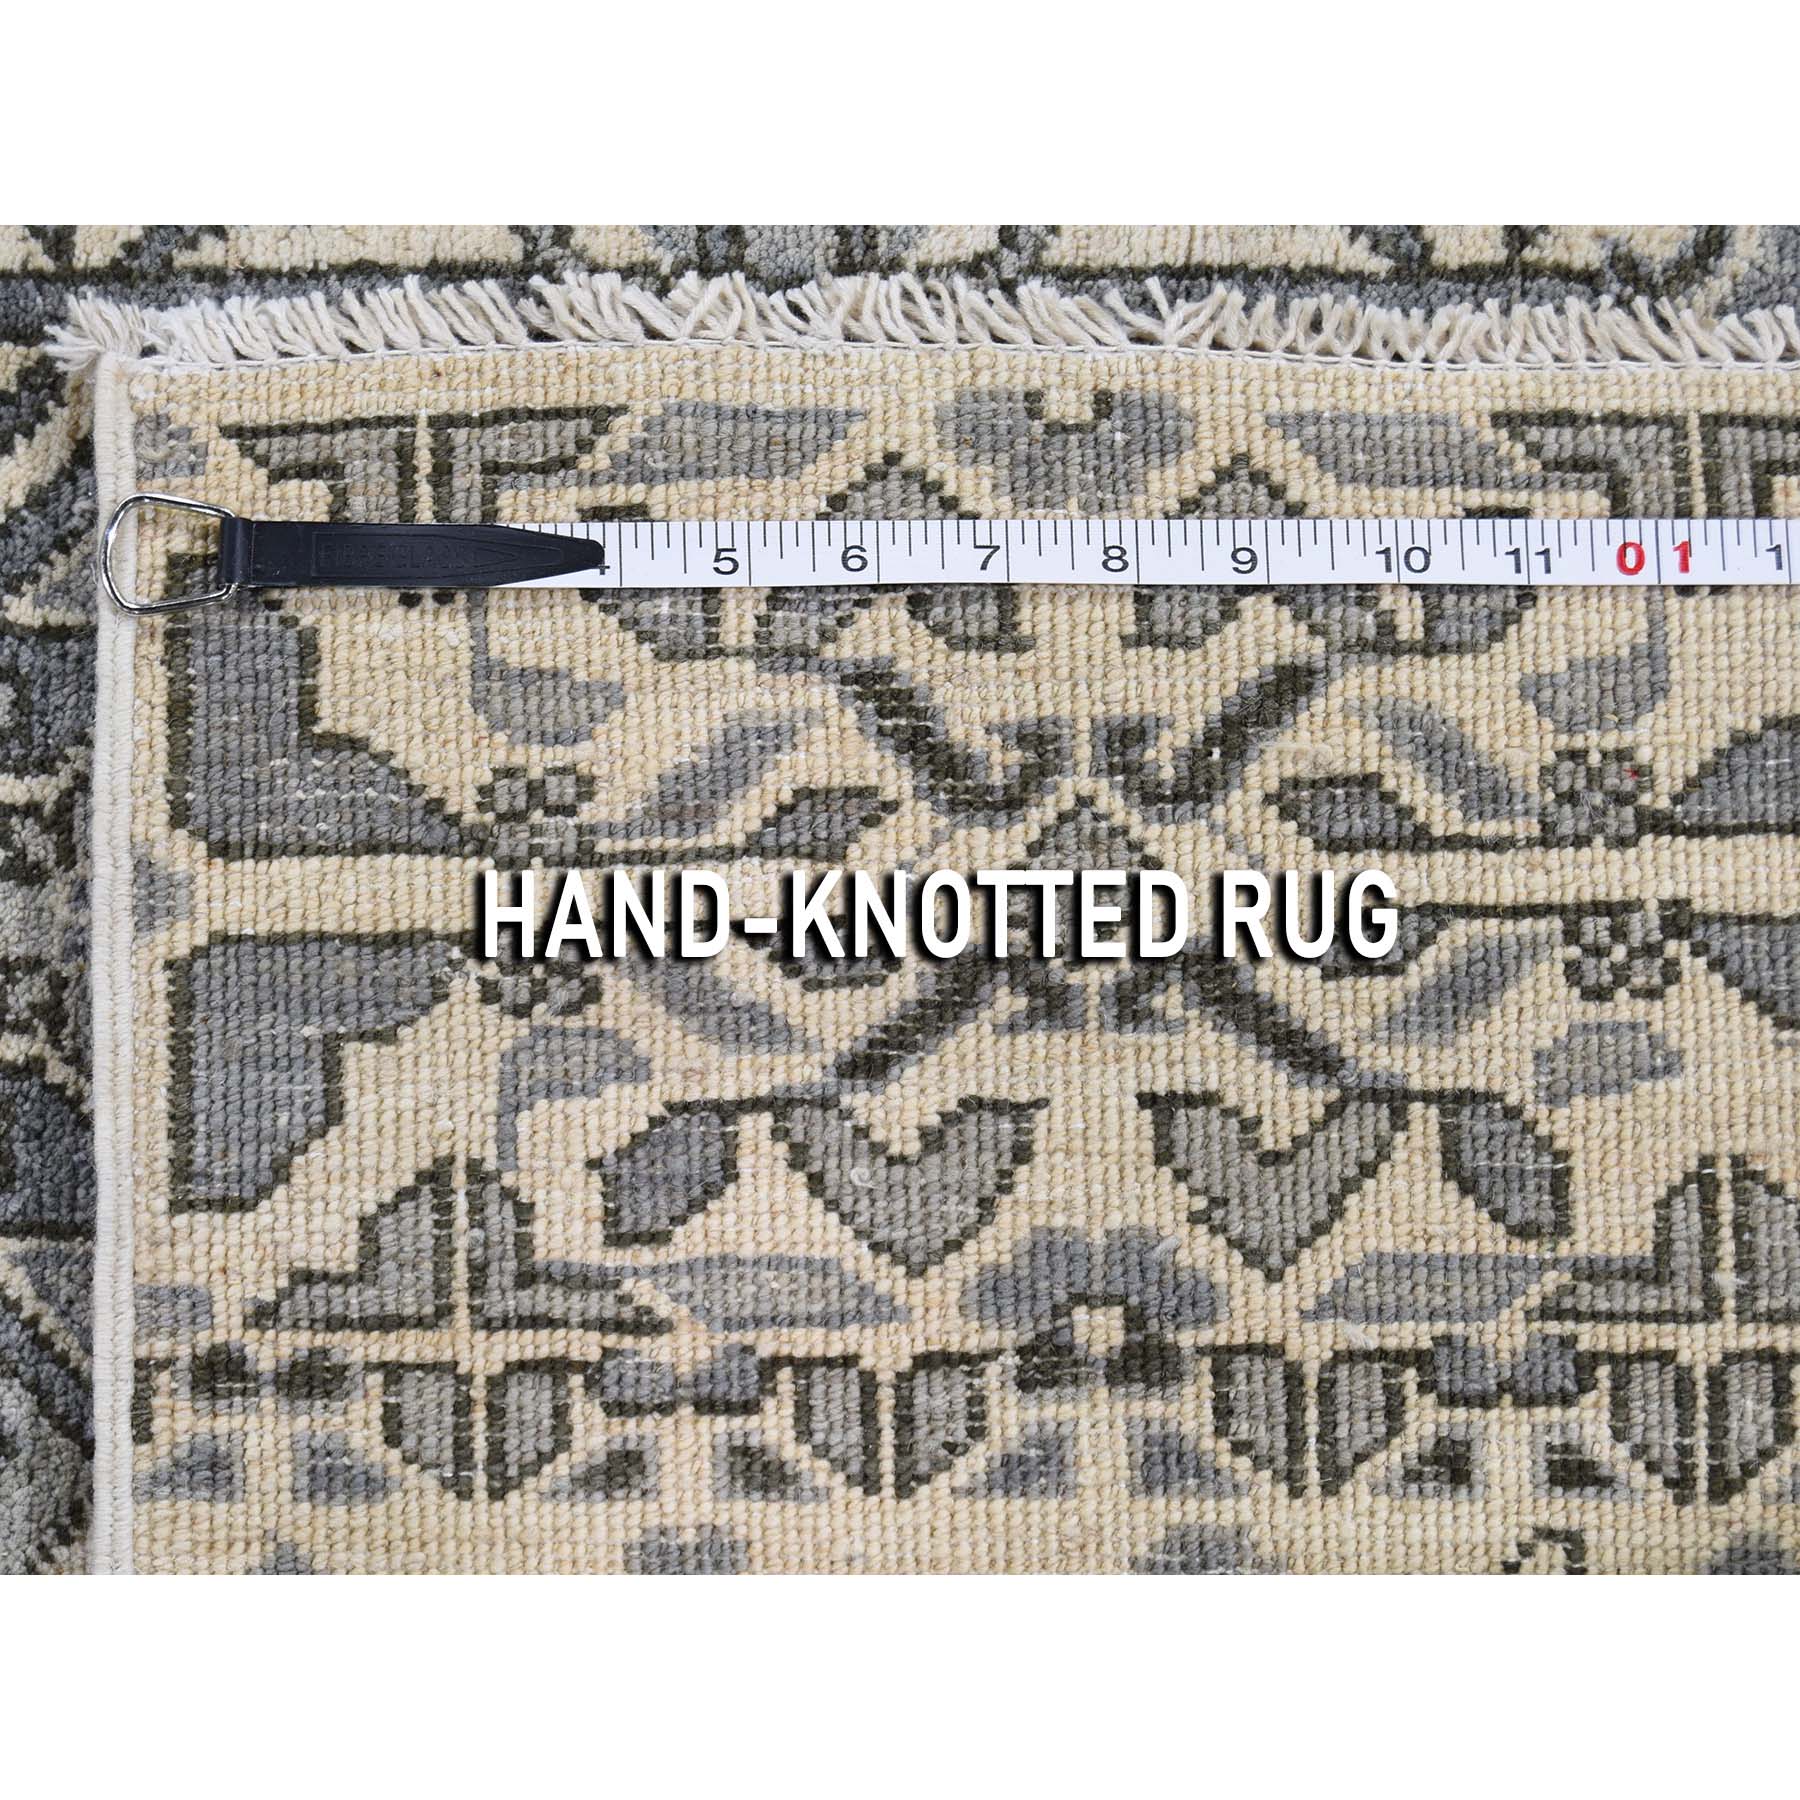 8-2 x10-5  Mamluk Design Hand-Knotted Undyed Natural Wool Oriental Rug 